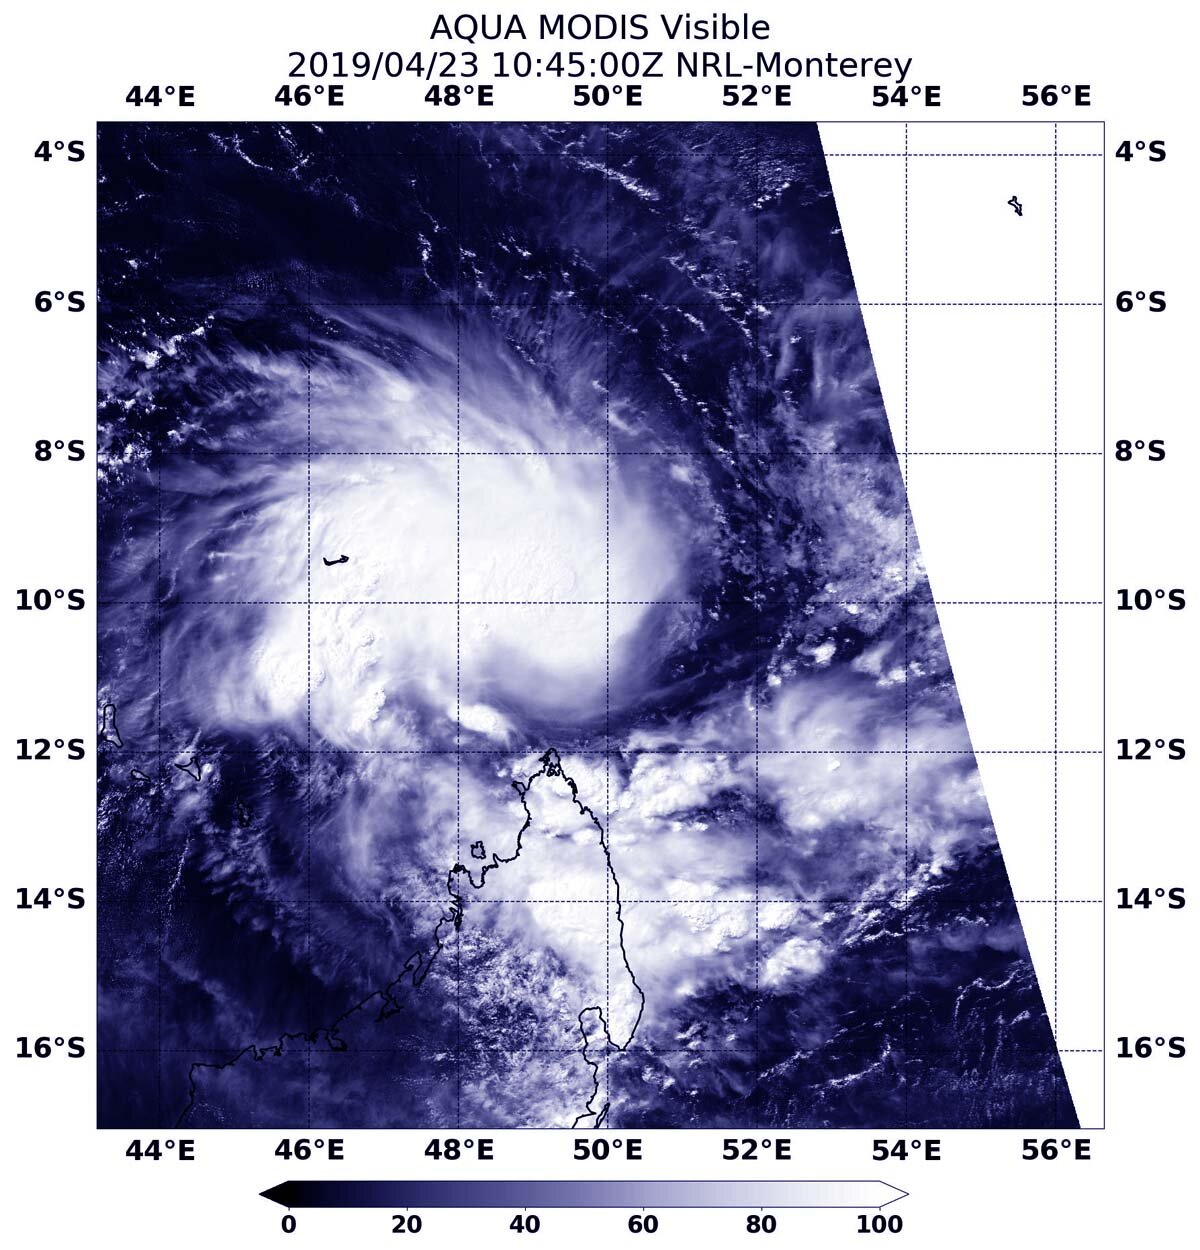 NASA catches formation of Tropical Cyclone near Aldabra